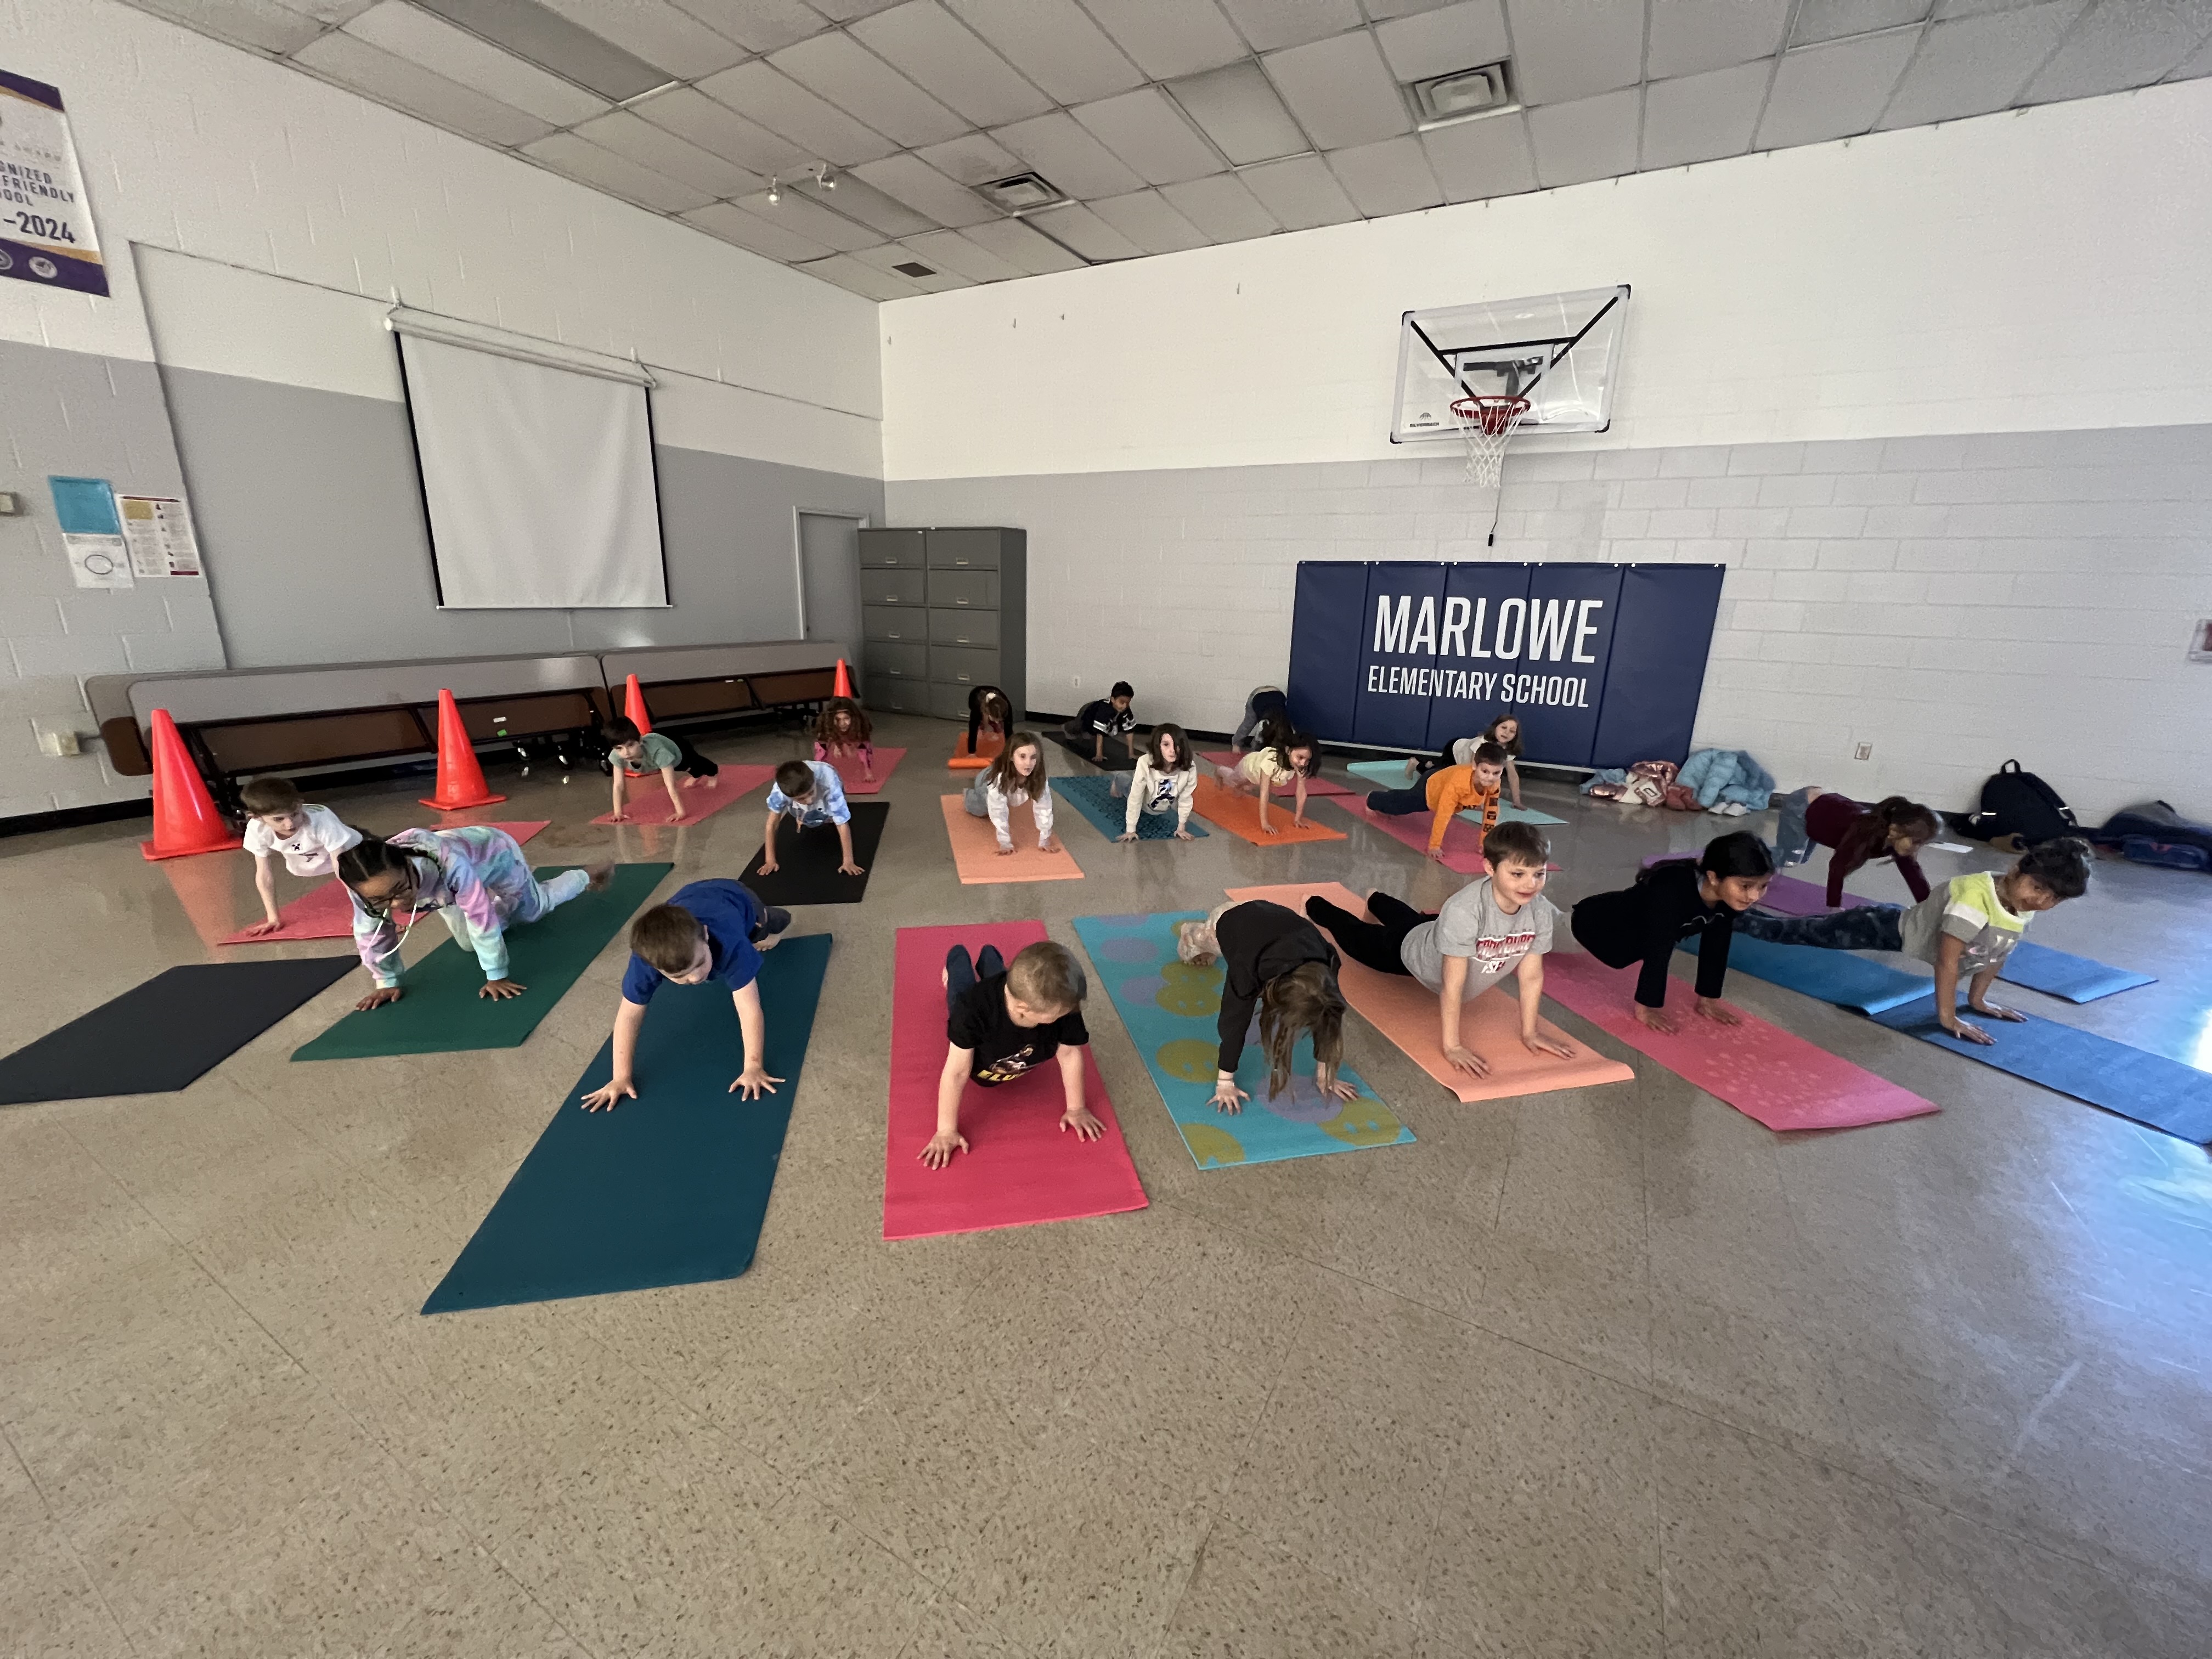 Students are on yoga mats doing the yoga pose "upward facing dog," which is a belly - down pose, while they hold their chests up toward the sky with the arms.